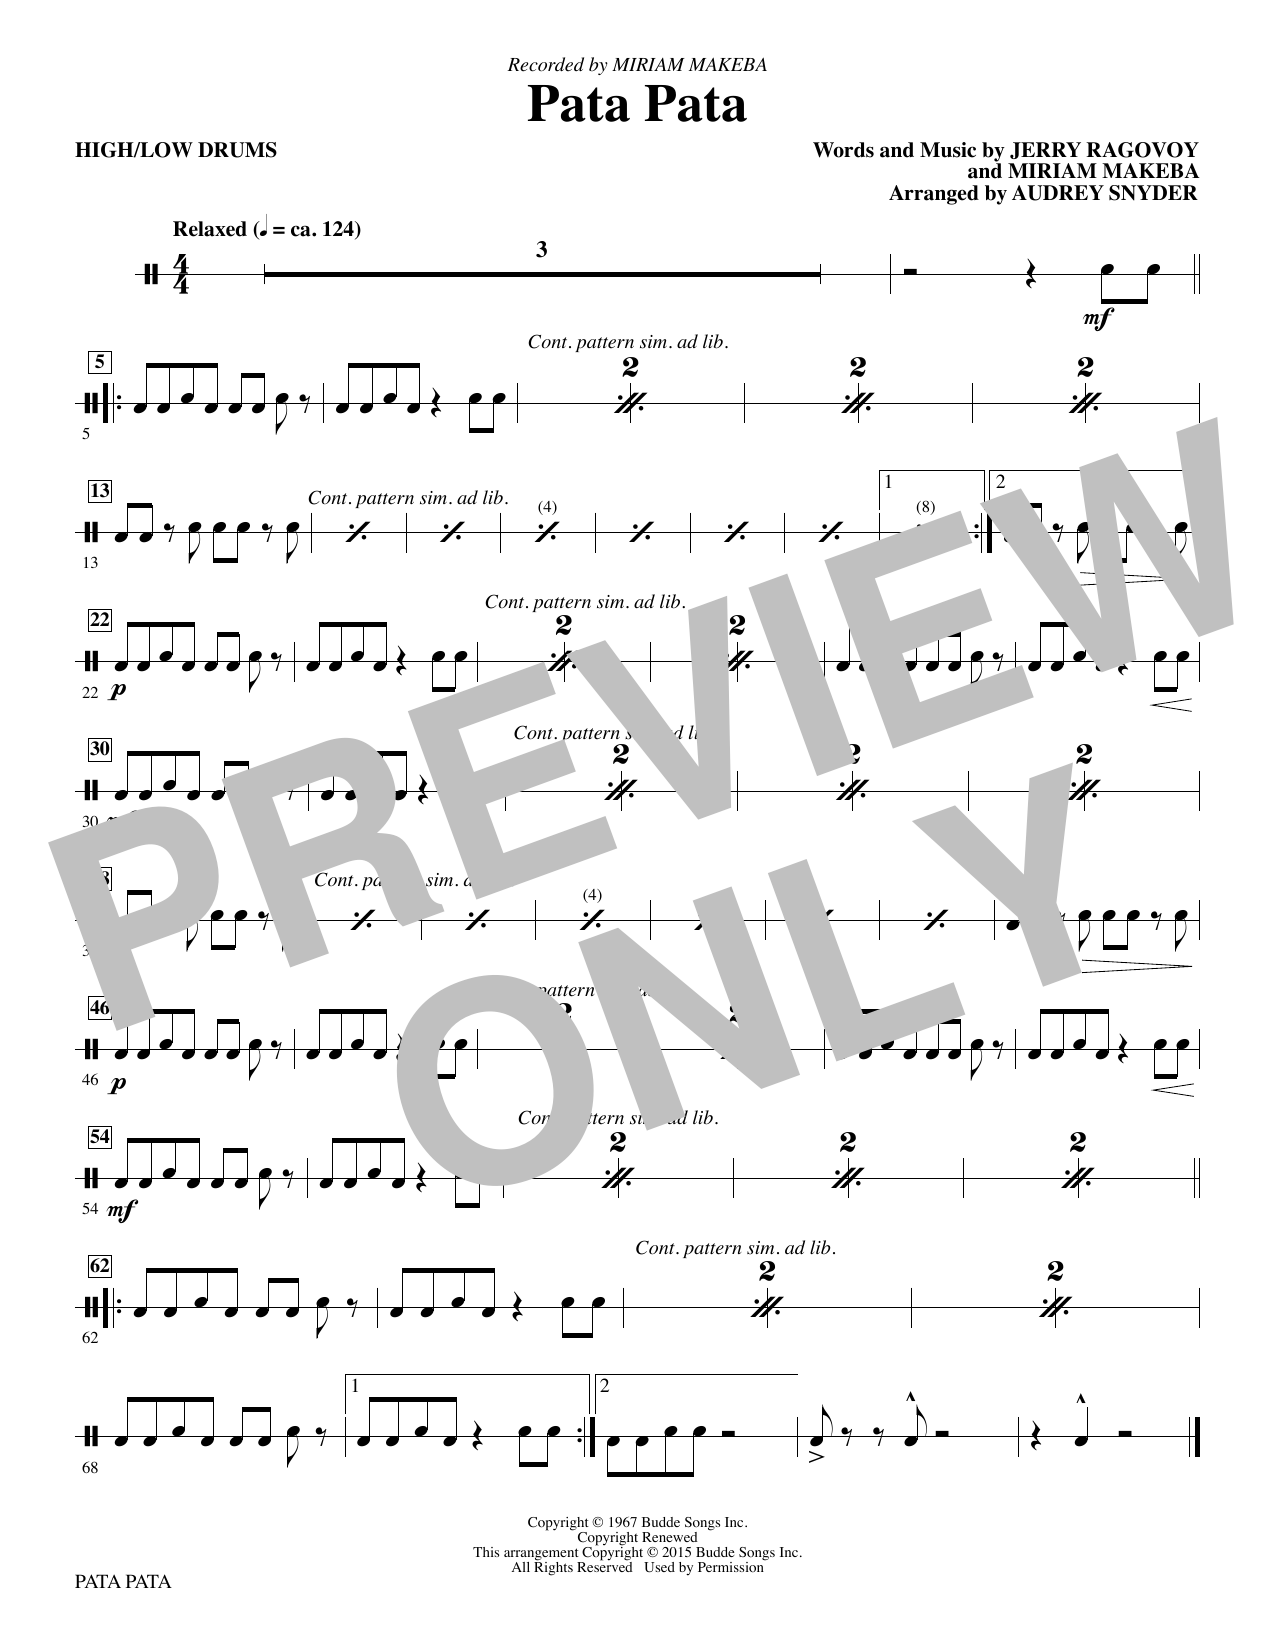 Audrey Snyder Pata Pata - Drums sheet music notes and chords. Download Printable PDF.